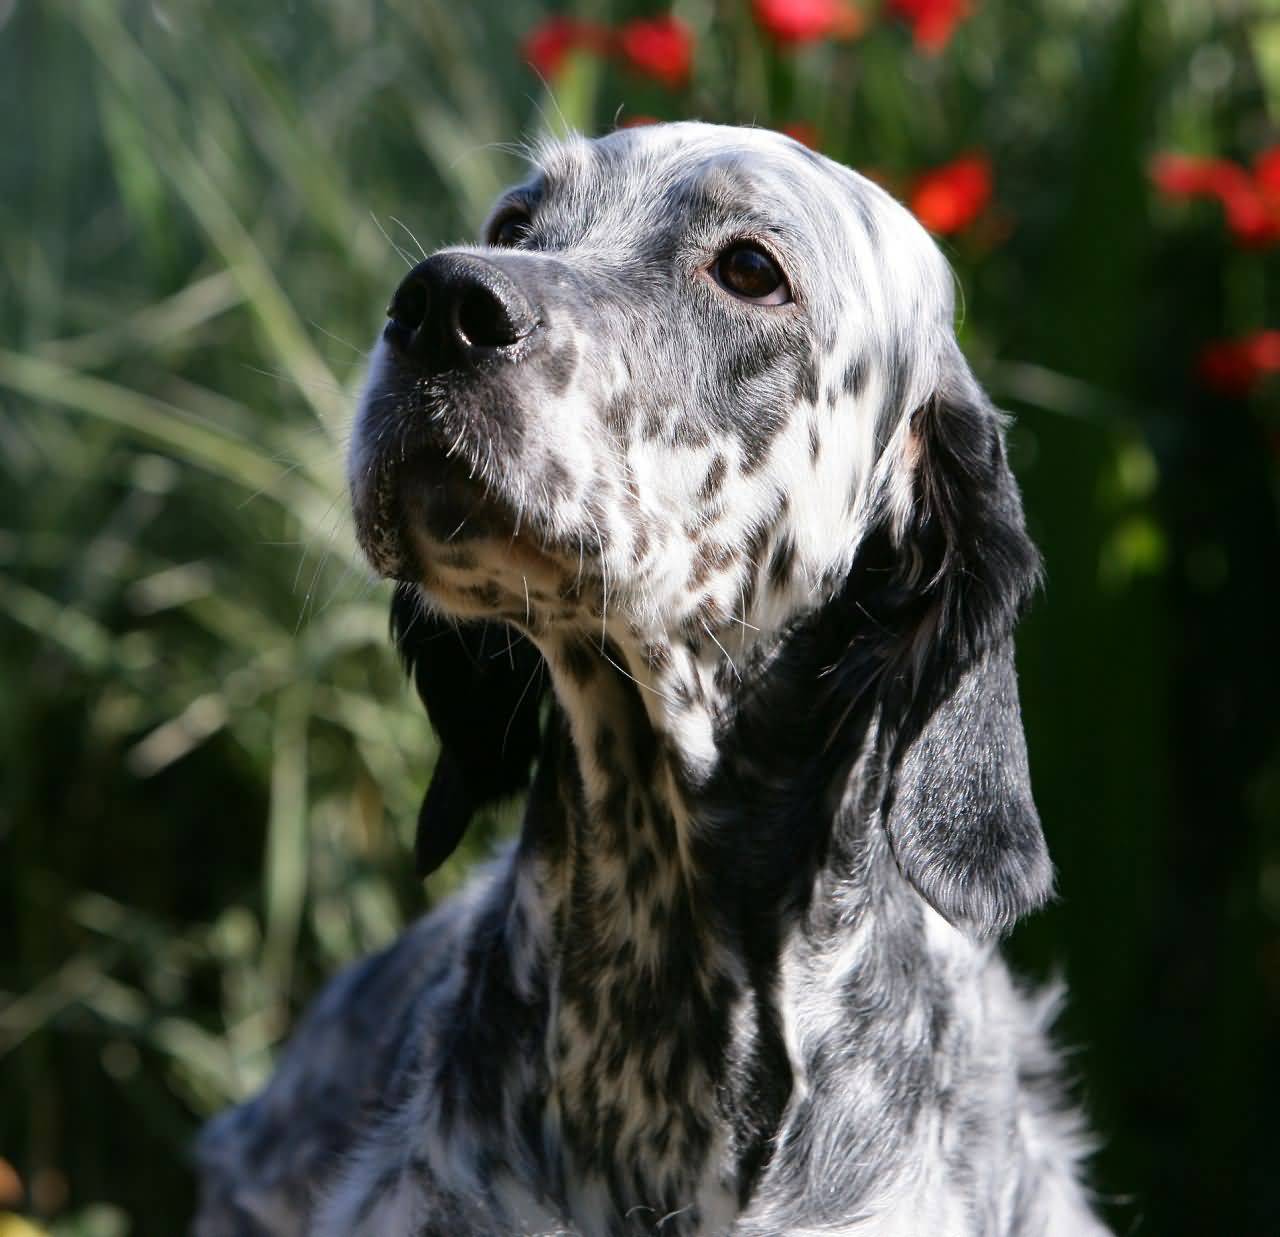 English Setter Dog Picture